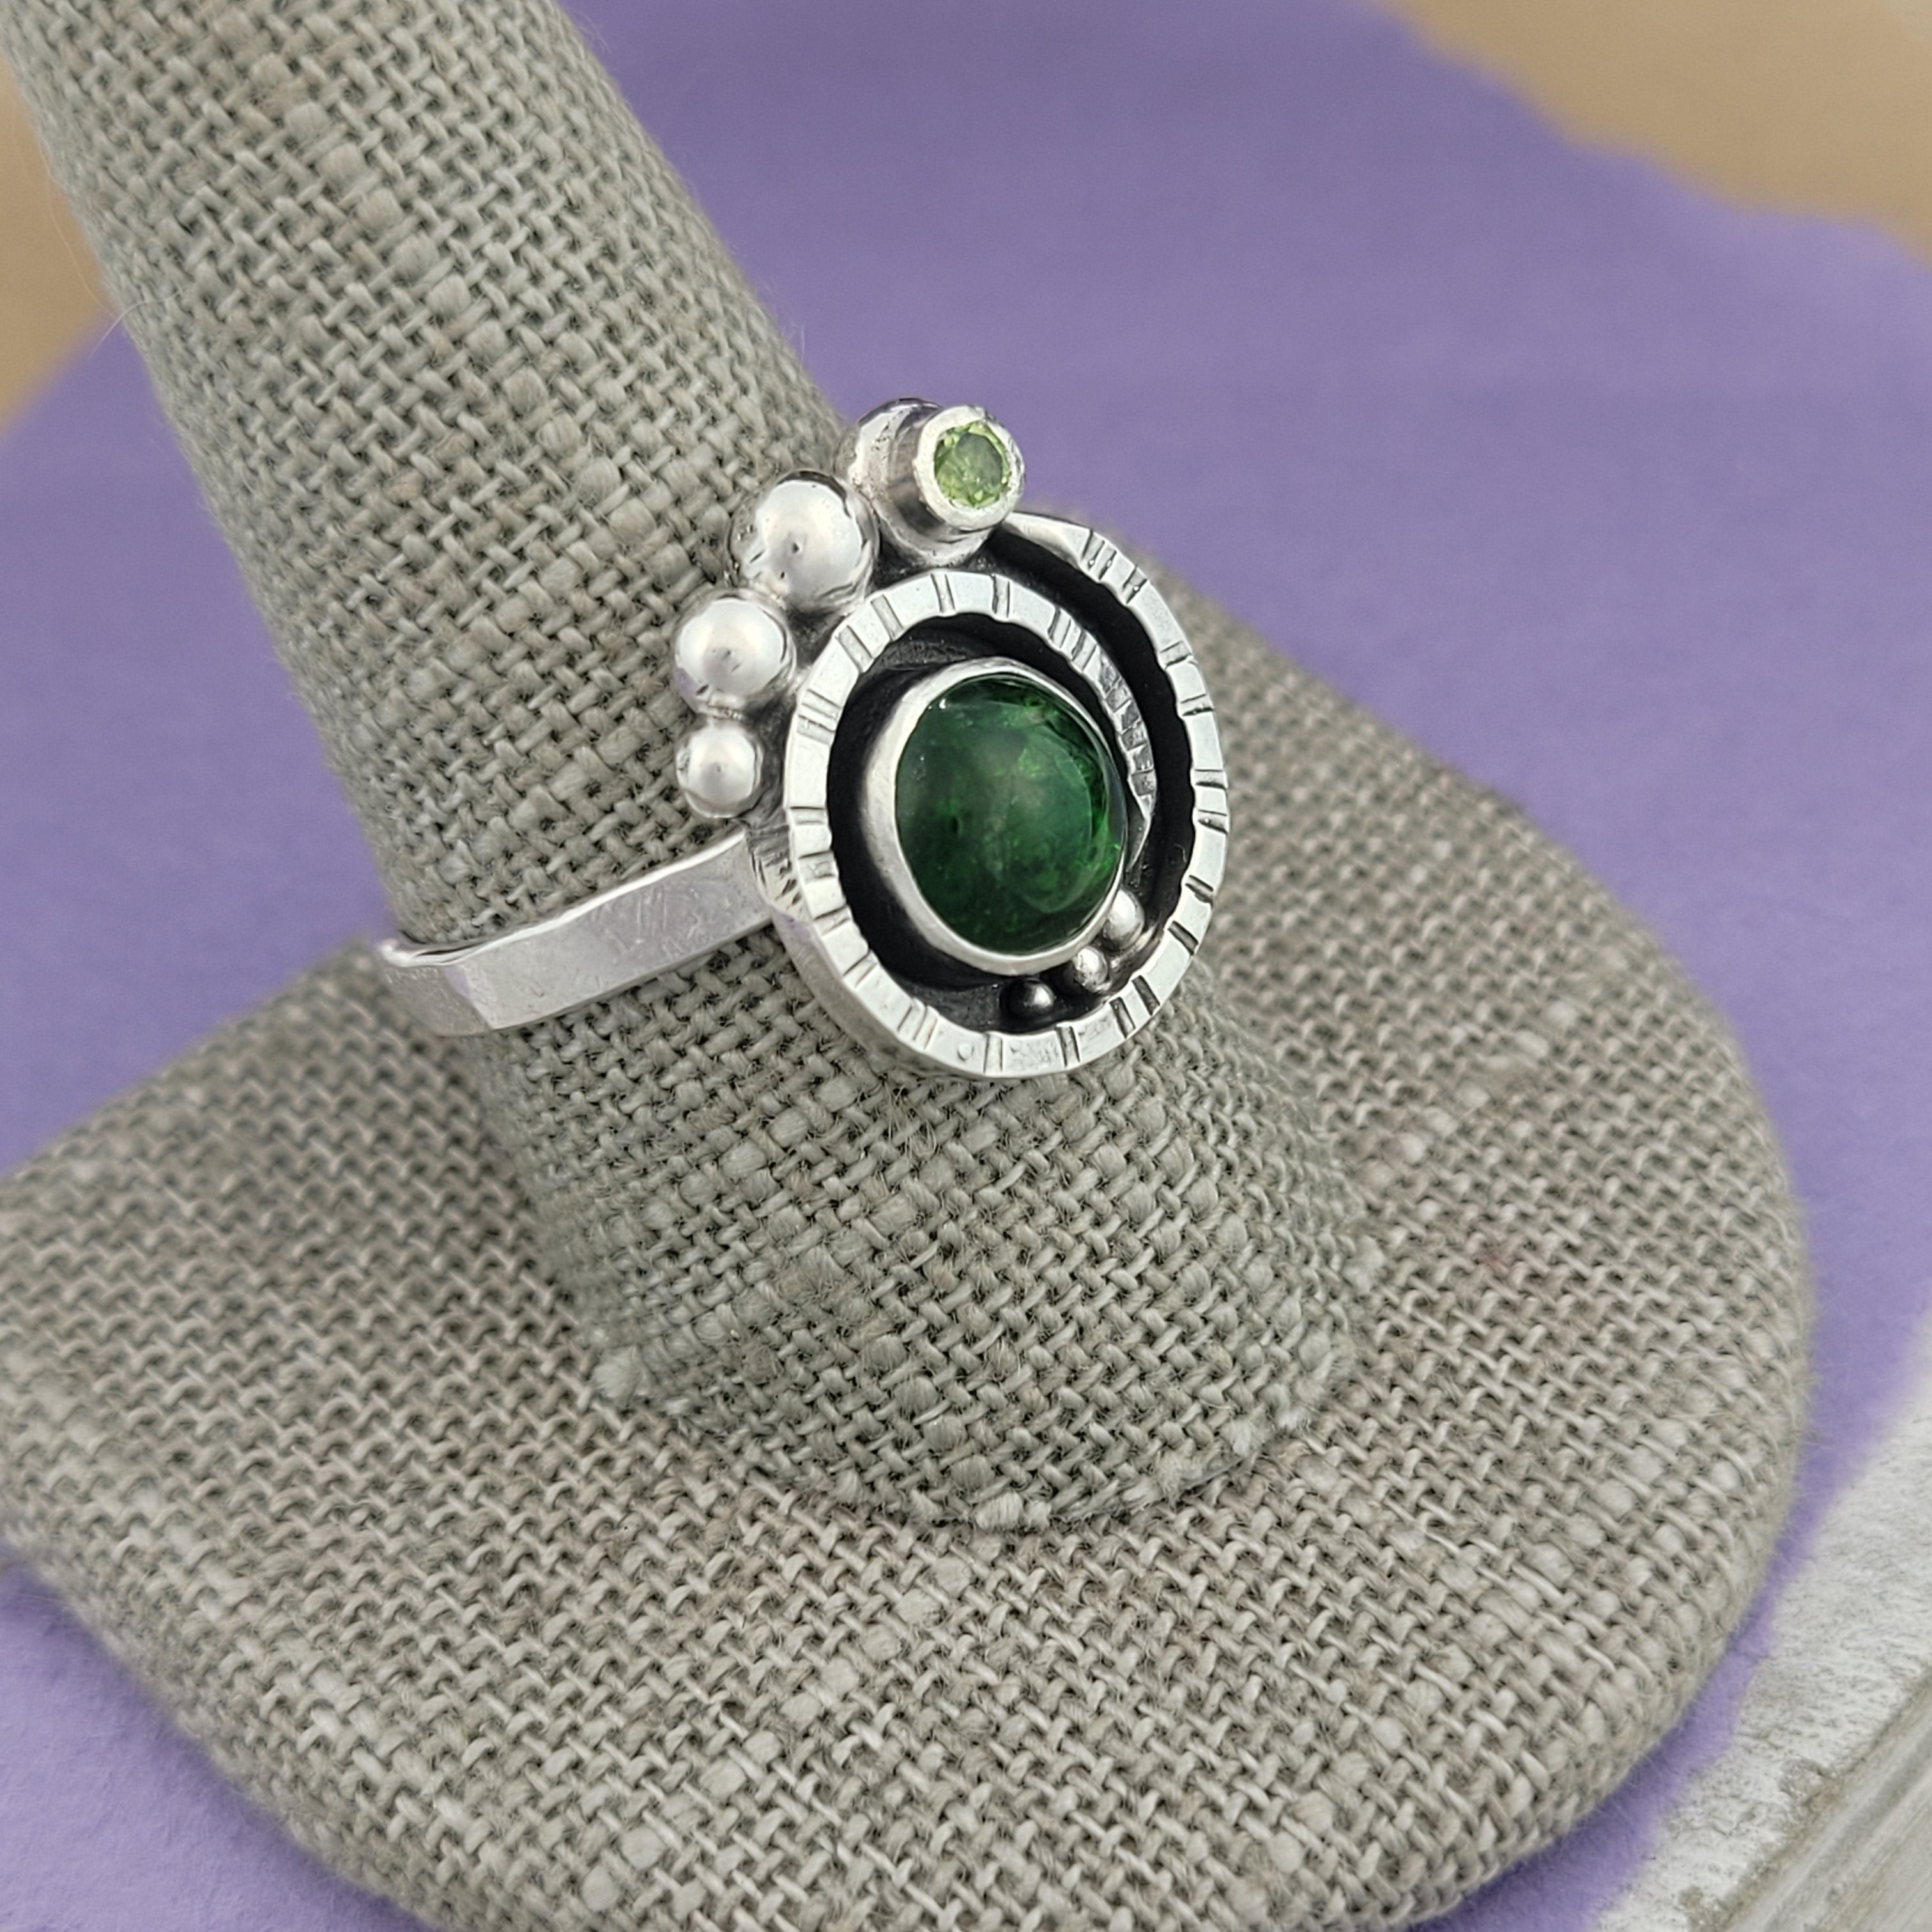 Size 10, Diopside and Peridot Sterling Silver Ring